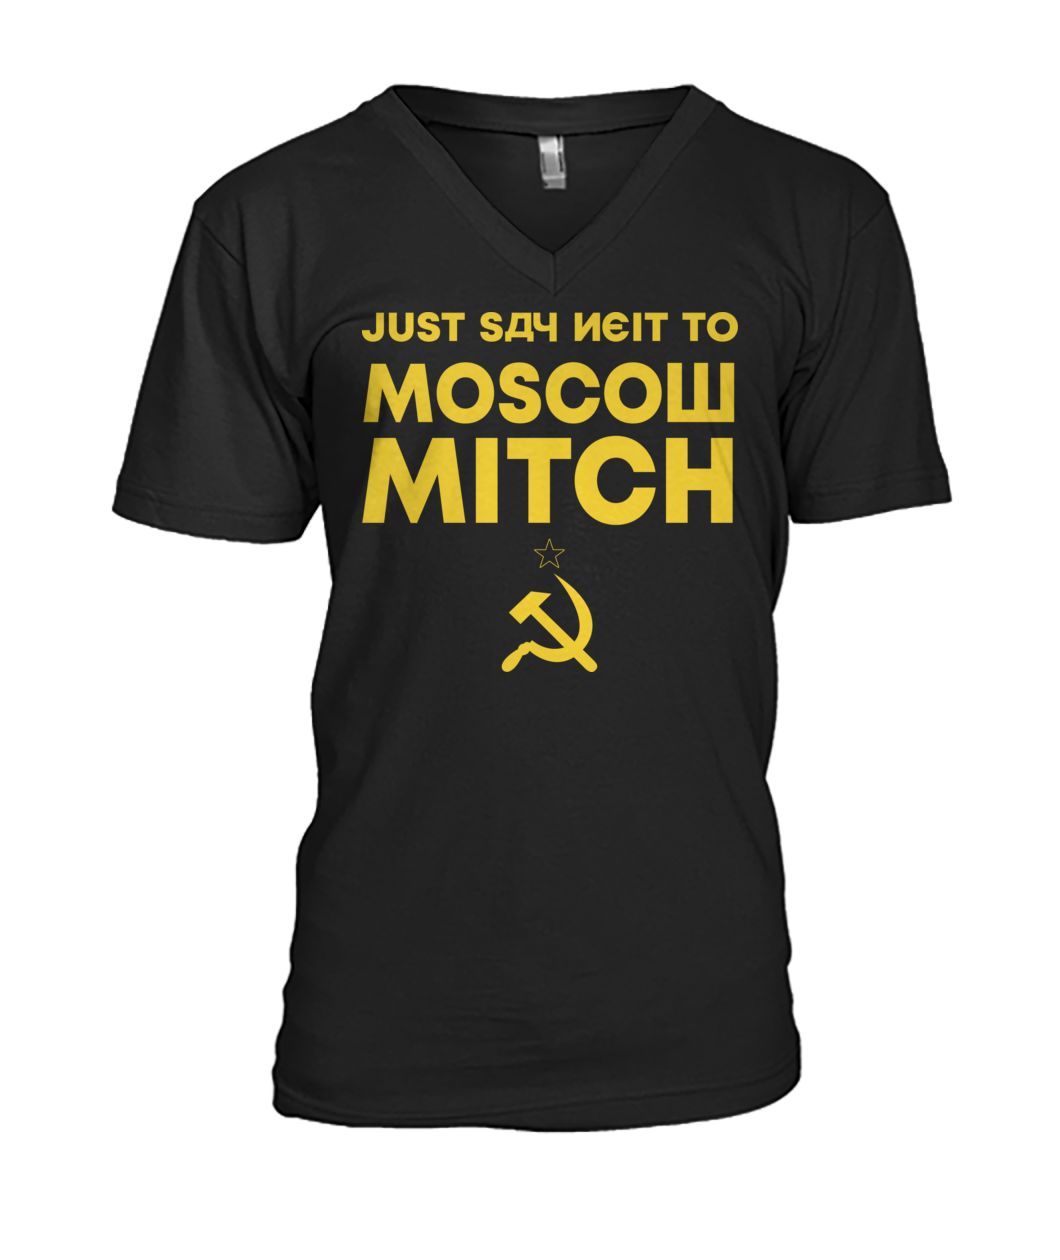 Just say neit to moscow mitch mens v-neck